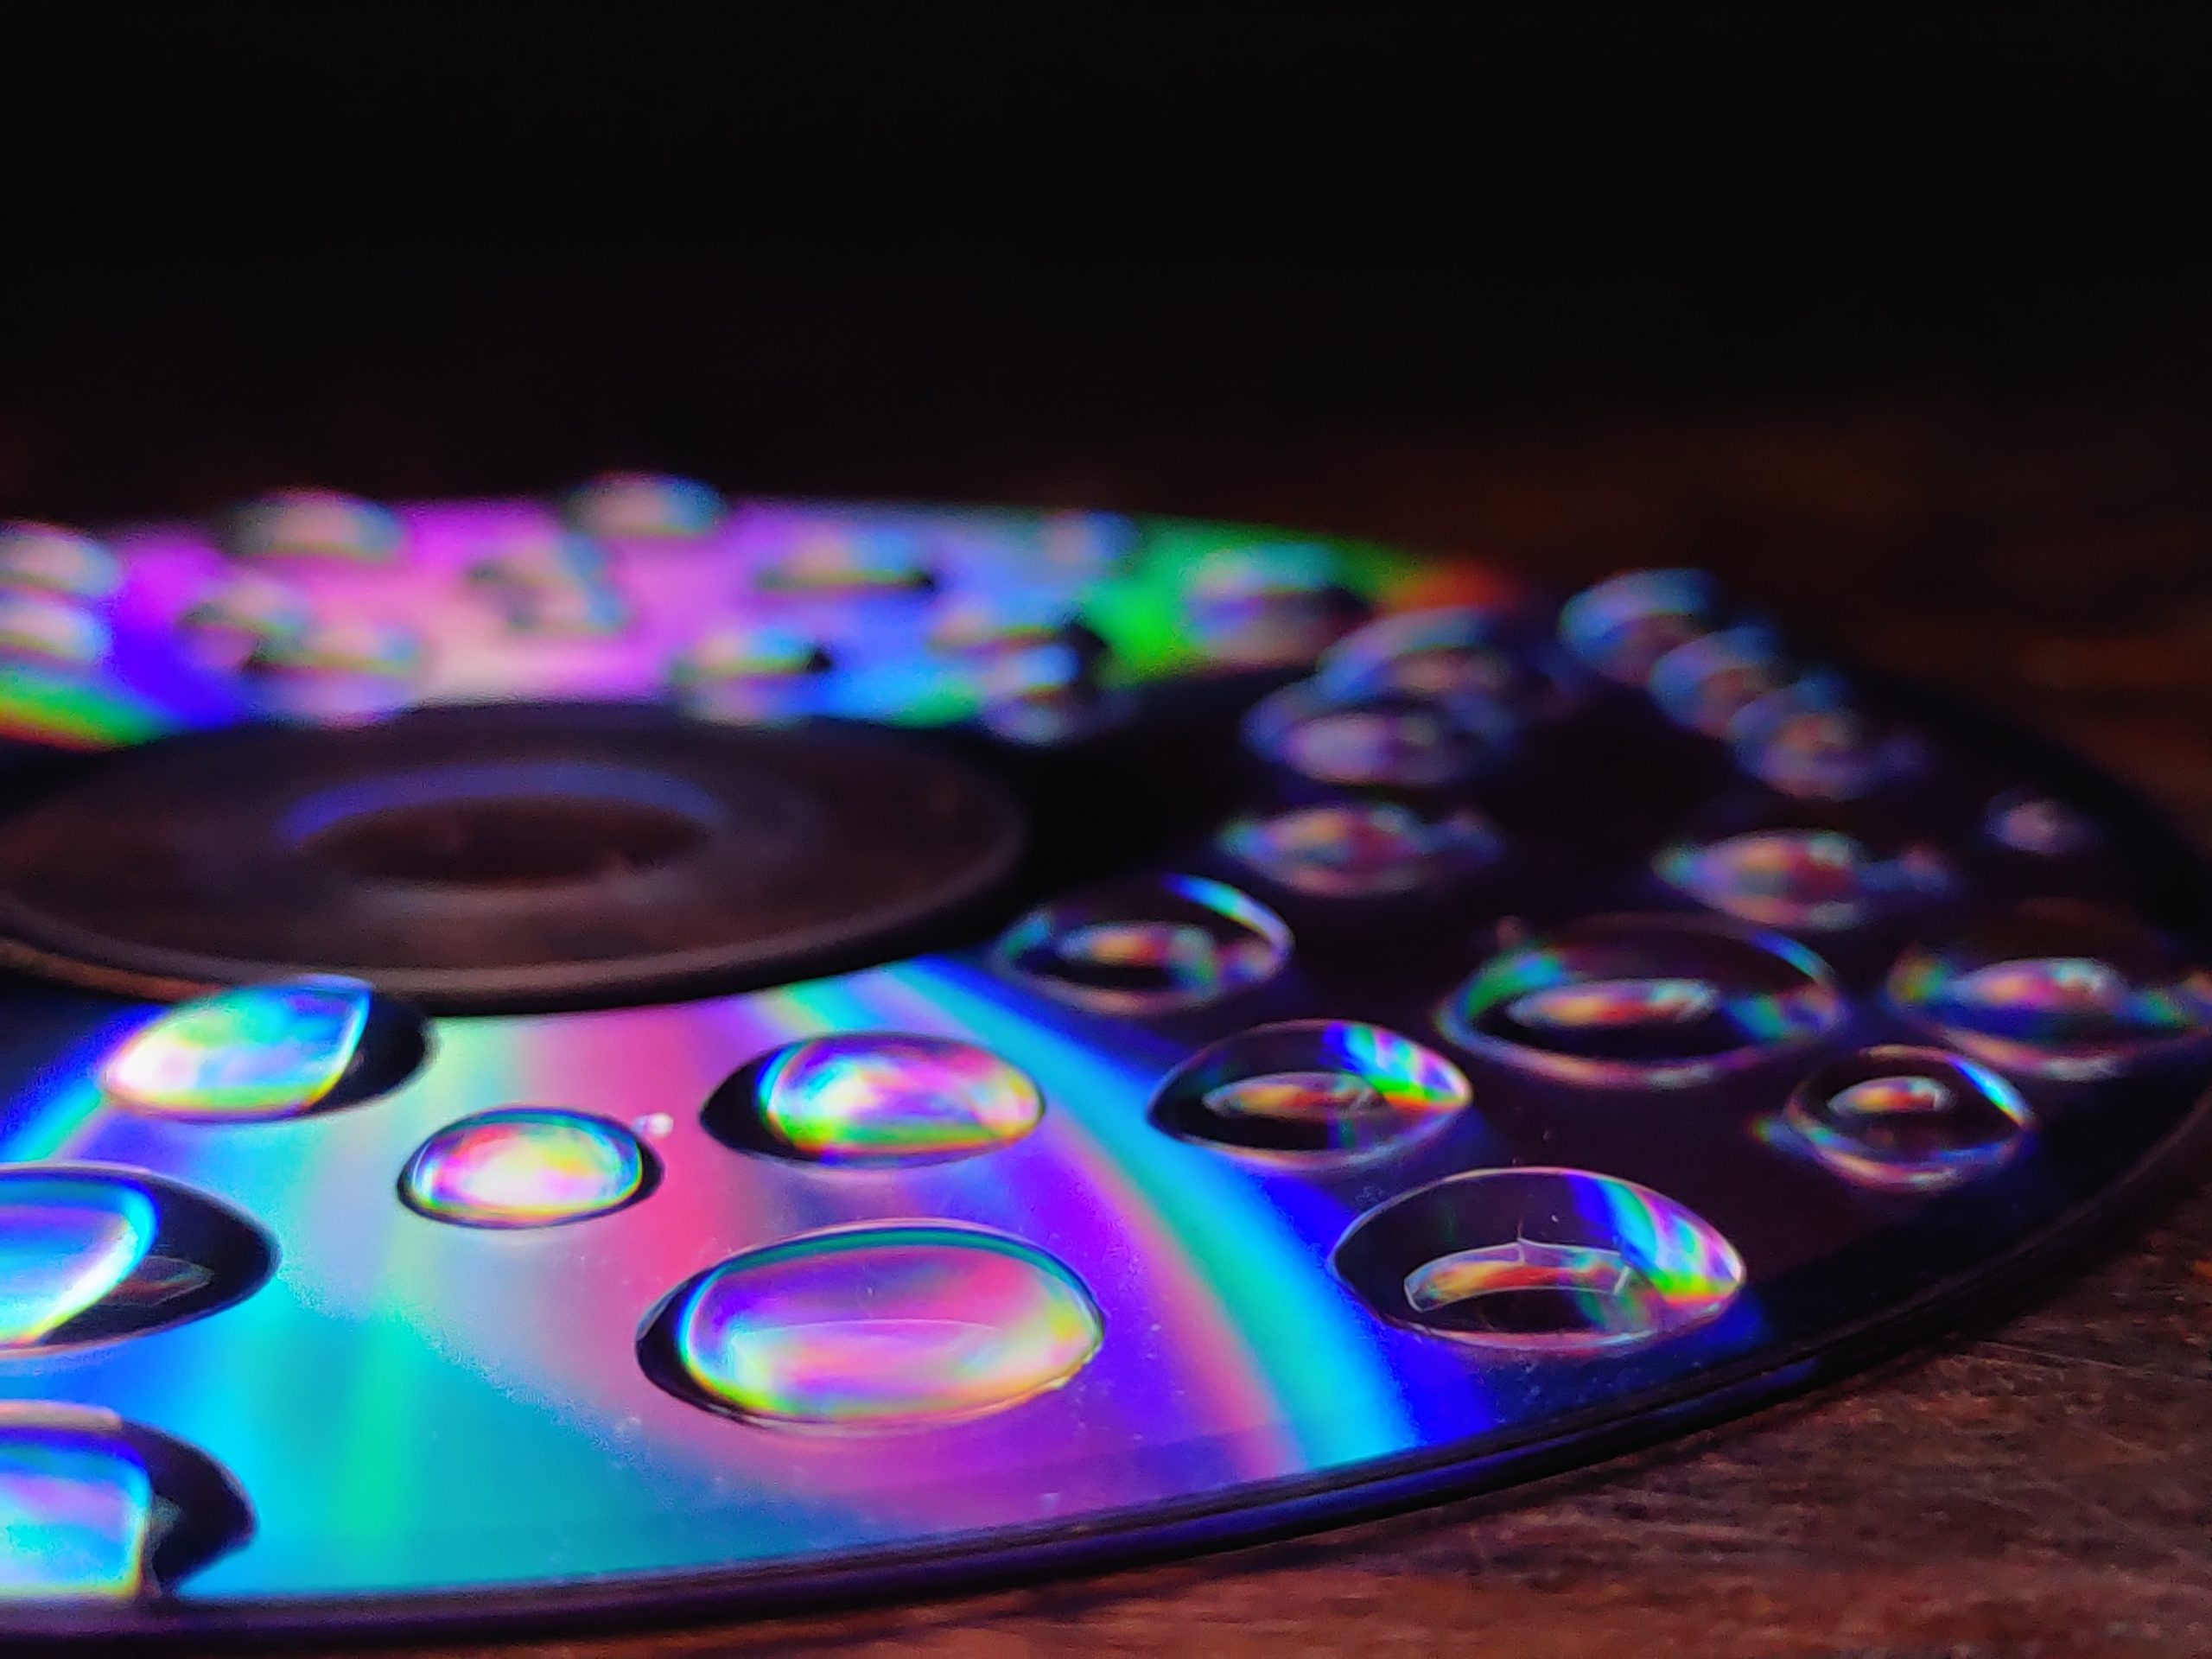 Water droplets on a cd